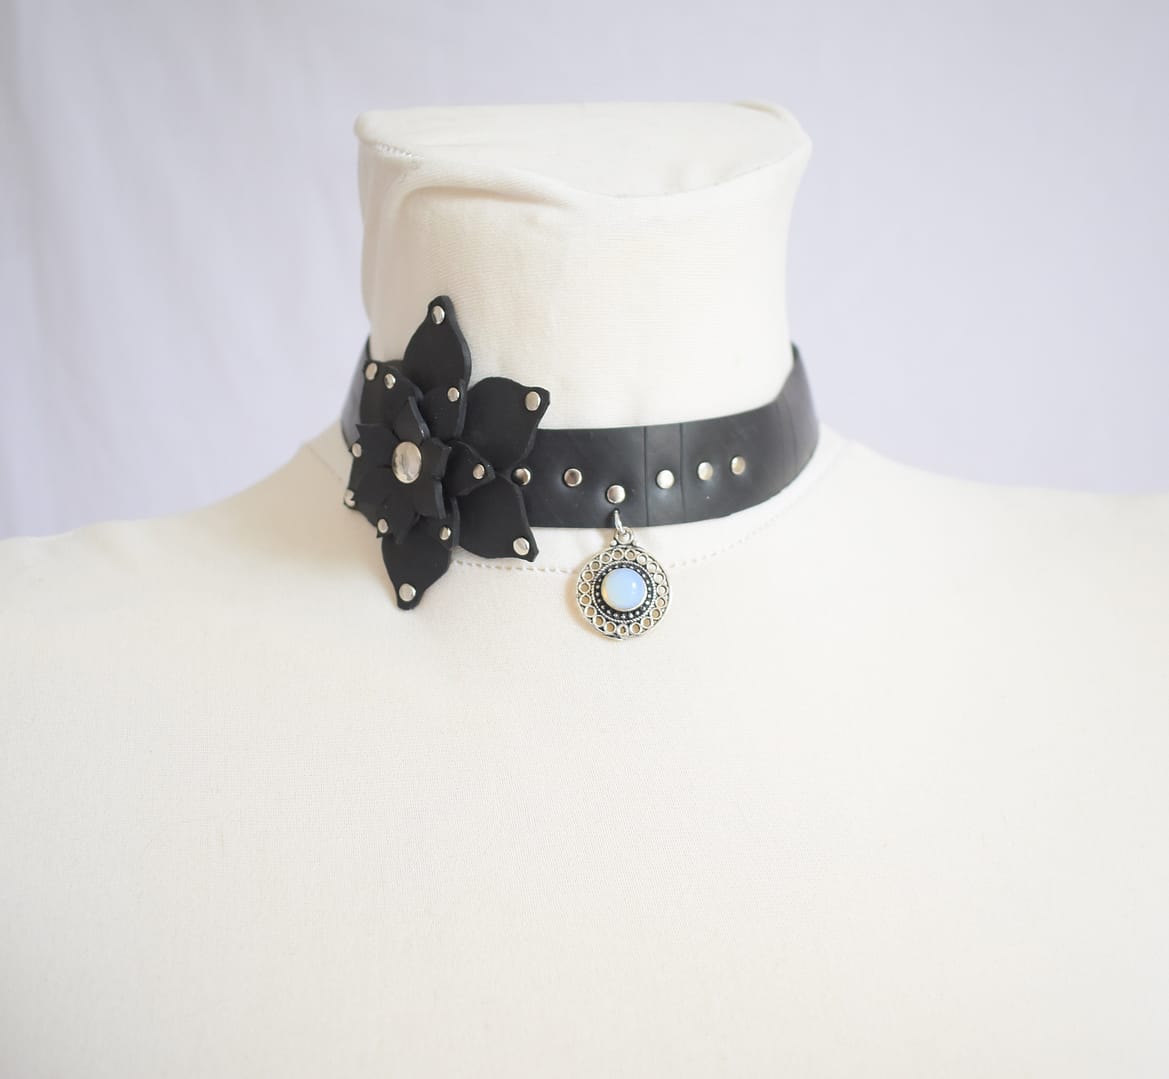 Recyled Jewellery: A white mannequin displays a Flower XL Choker Moon Stone adorned with silver studs. The choker features a black leather flower with a silver center on one side and a small, round pendant with a light blue moon stone in an ornate silver setting at the front. @ Reblack Shop